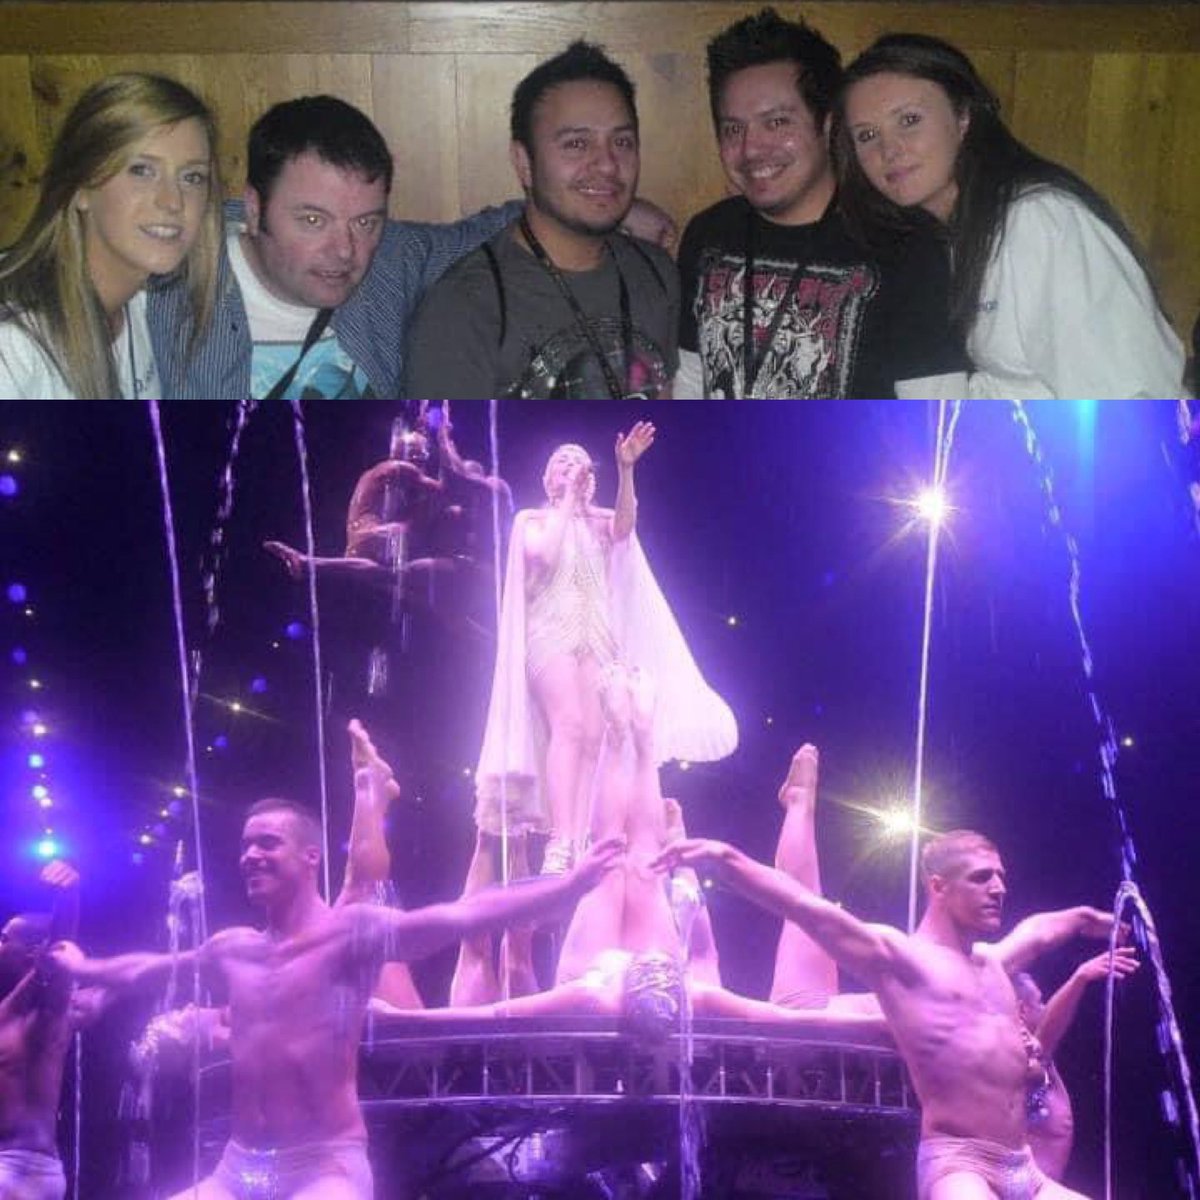 This day 13 years ago I was in the splash zone at Kylie’s Aphrodite tour in the 3 arena in dublin for the 1st of 2 nights. Here is 2 photos the 2nd one is in the vip bar before the concerts with some Kylie fans.